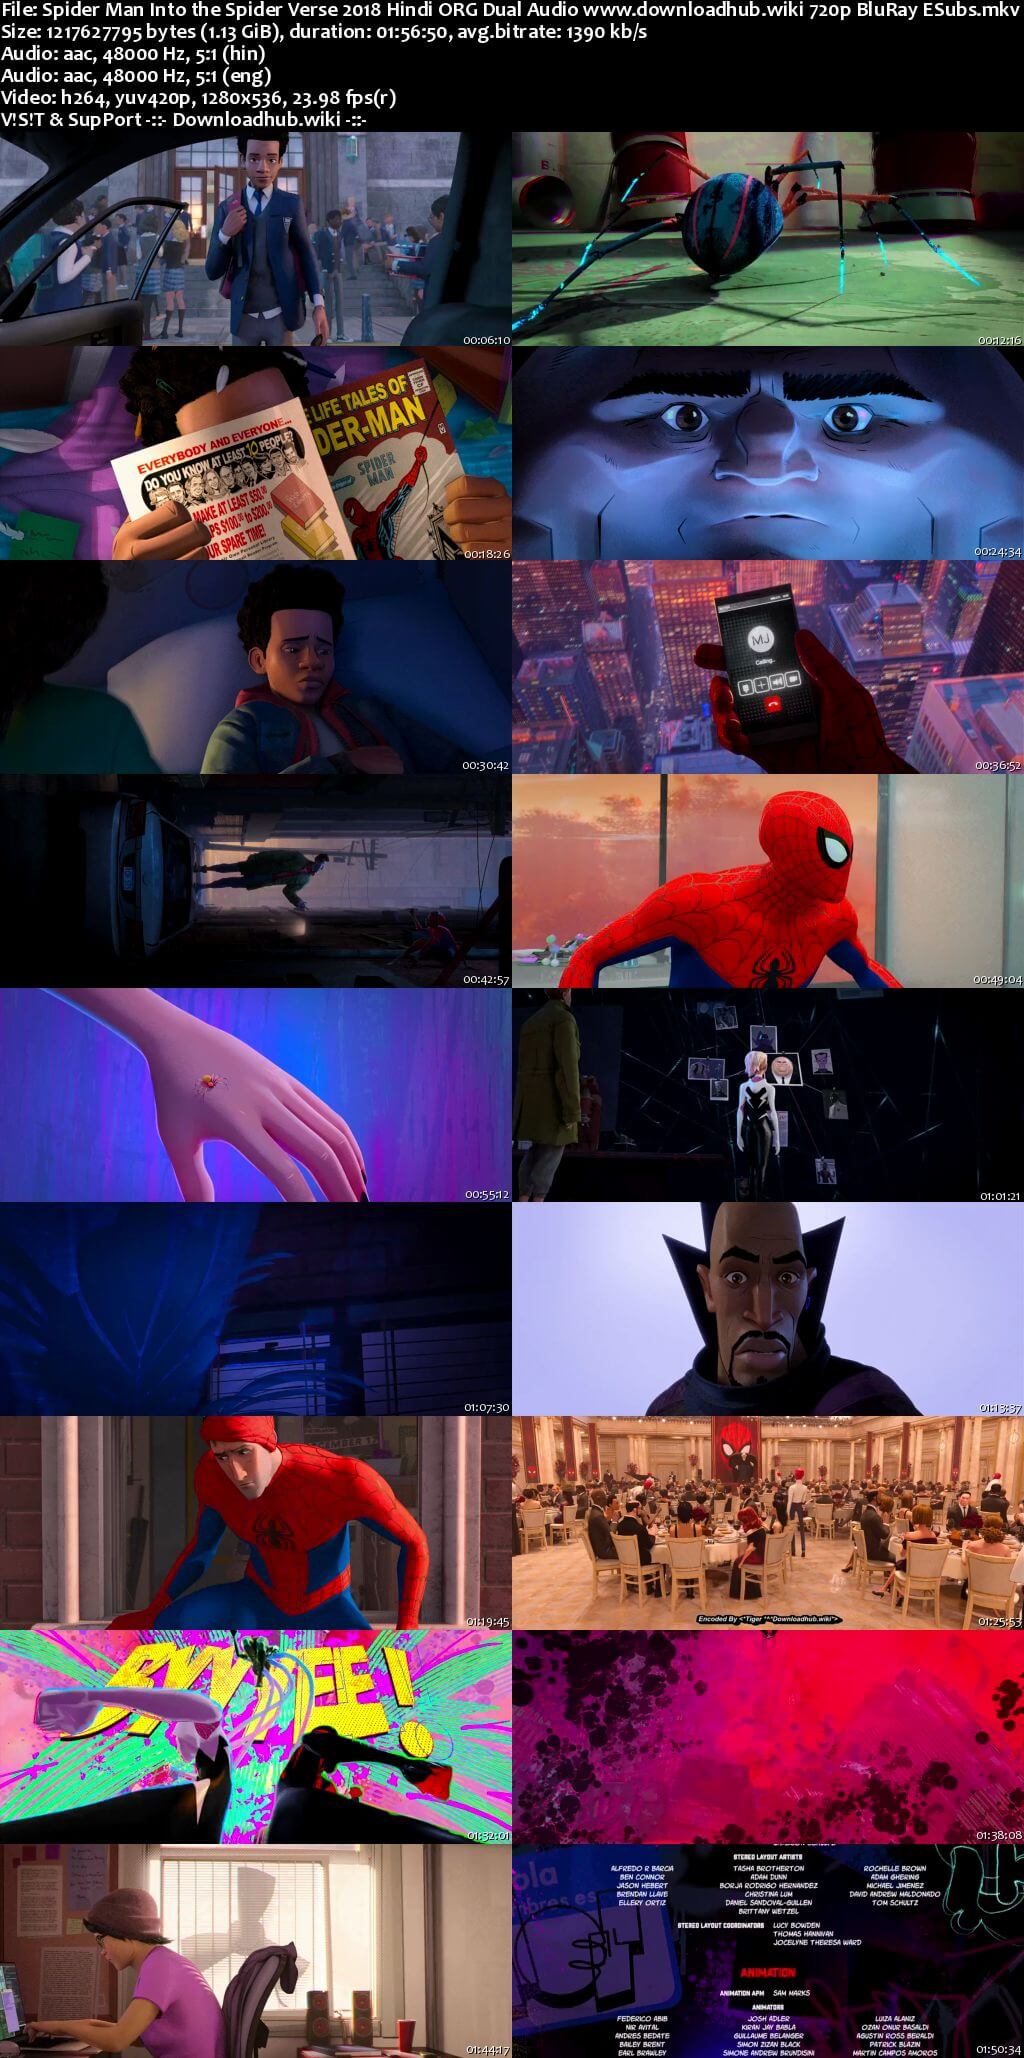 Spider Man Into the Spider Verse 2018 Hindi ORG Dual Audio 720p BluRay ESubs